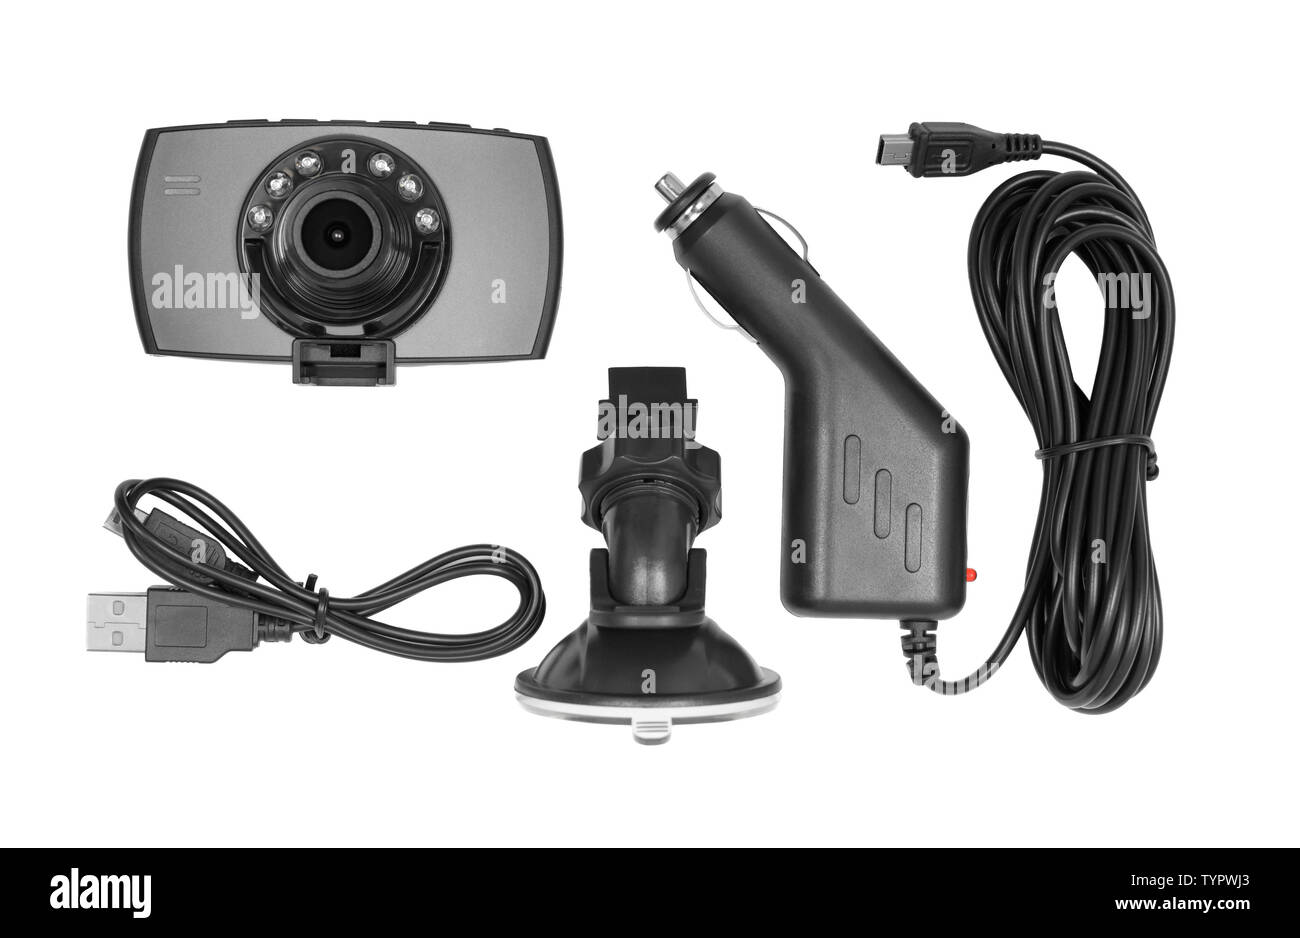 Dashboard camera DVR video recorder set isolated on white background Stock Photo